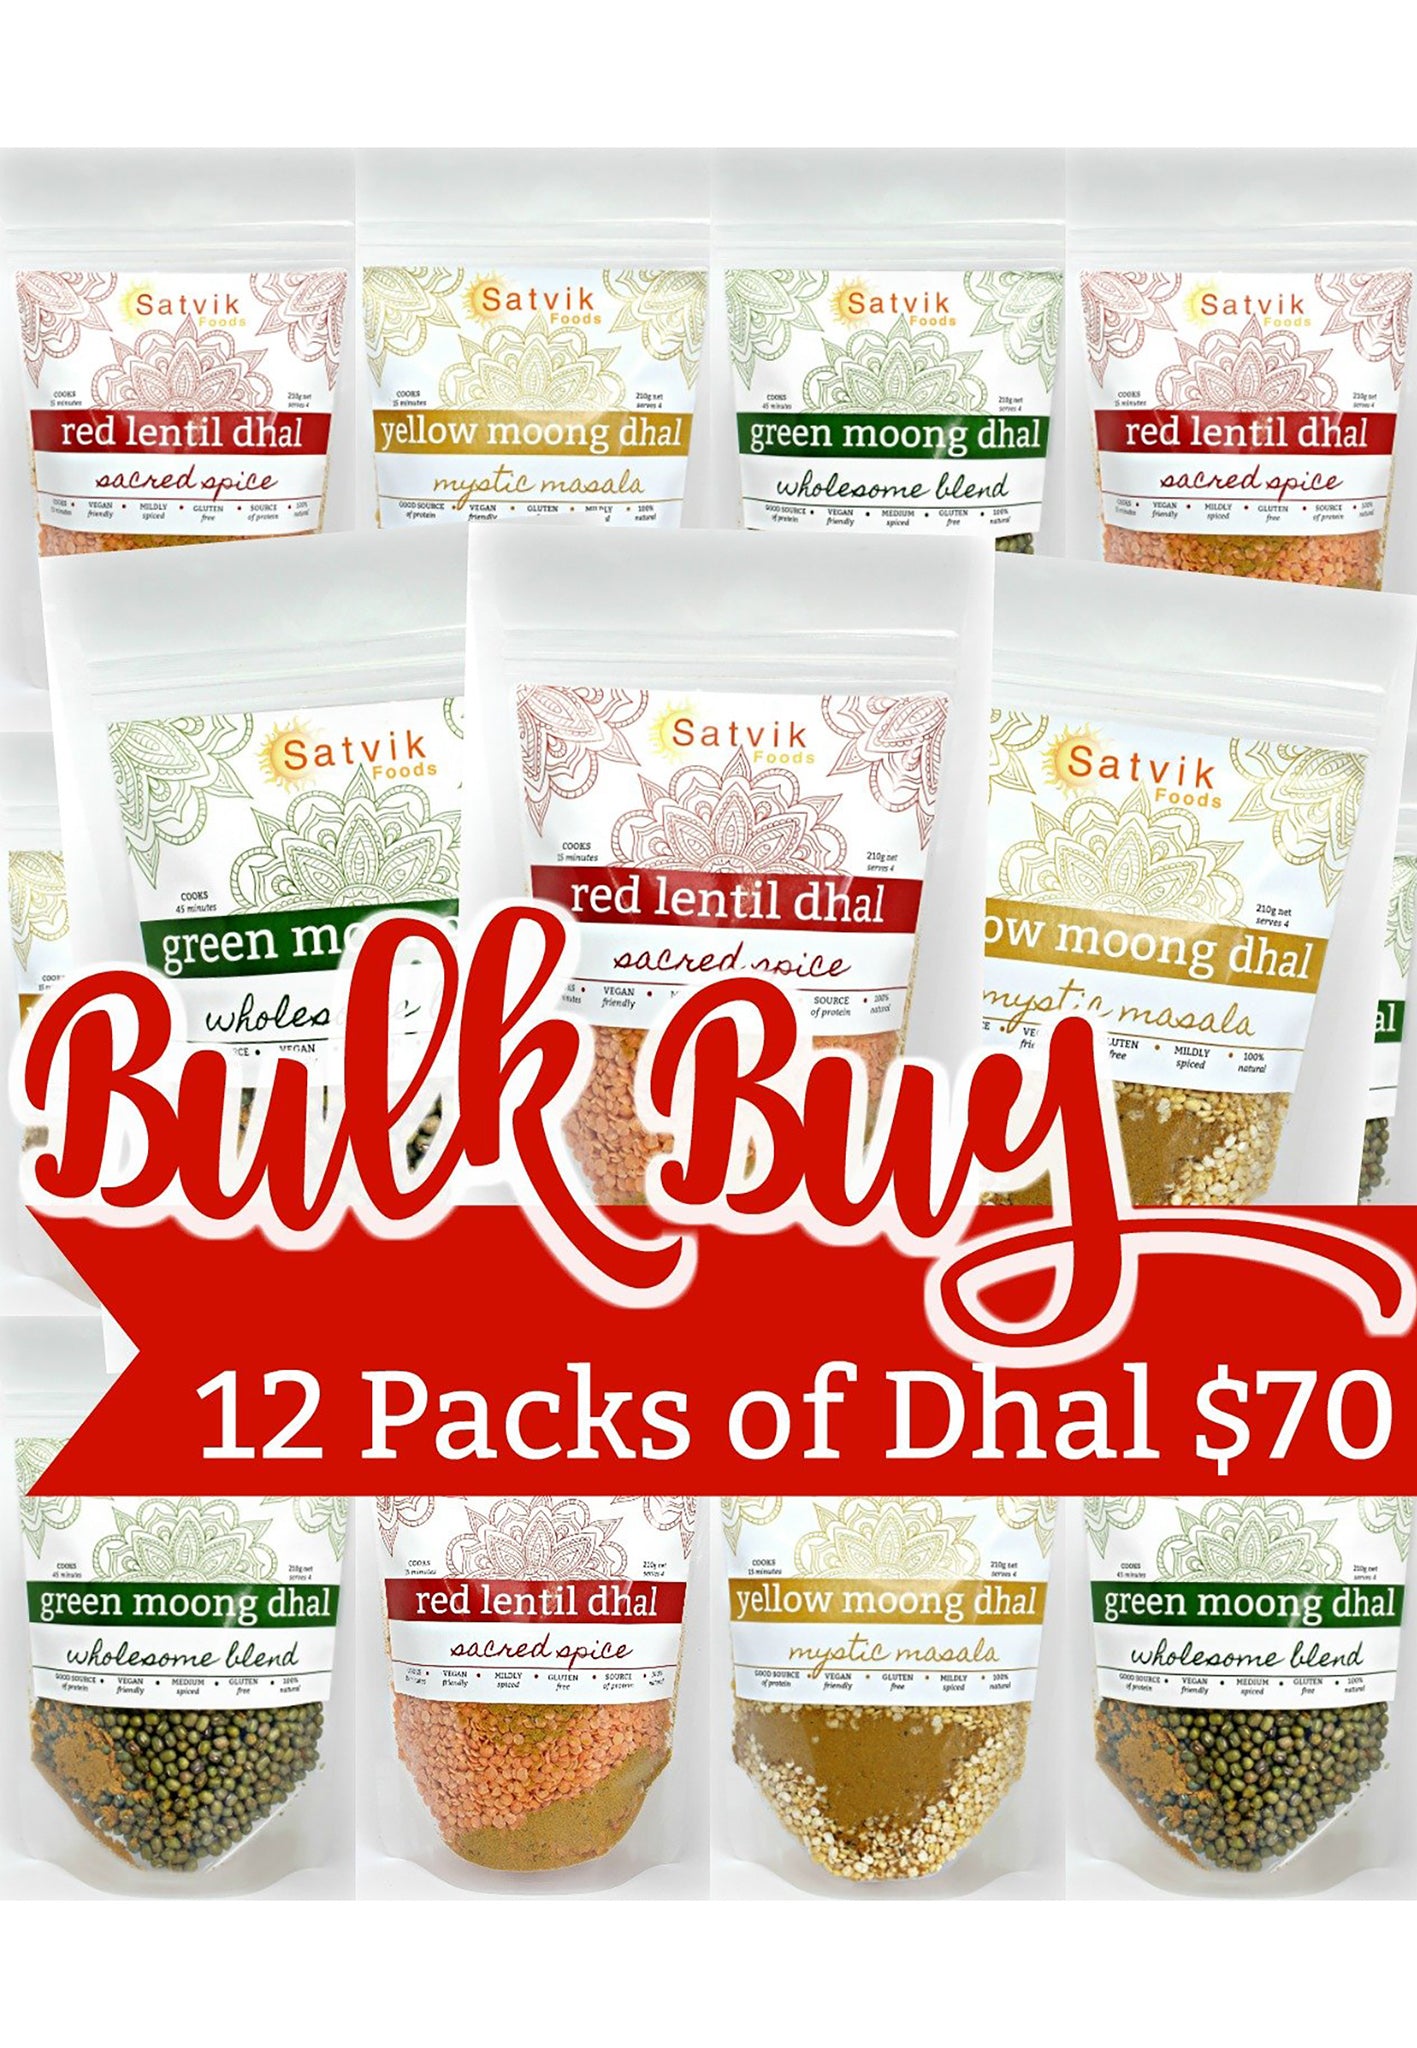 Satvik foods bulk buy range featuring red lentil dhal, green moong dhal and yellow moong dhal. Easy meal packs that are ready in minutes. Bulk buy to save money